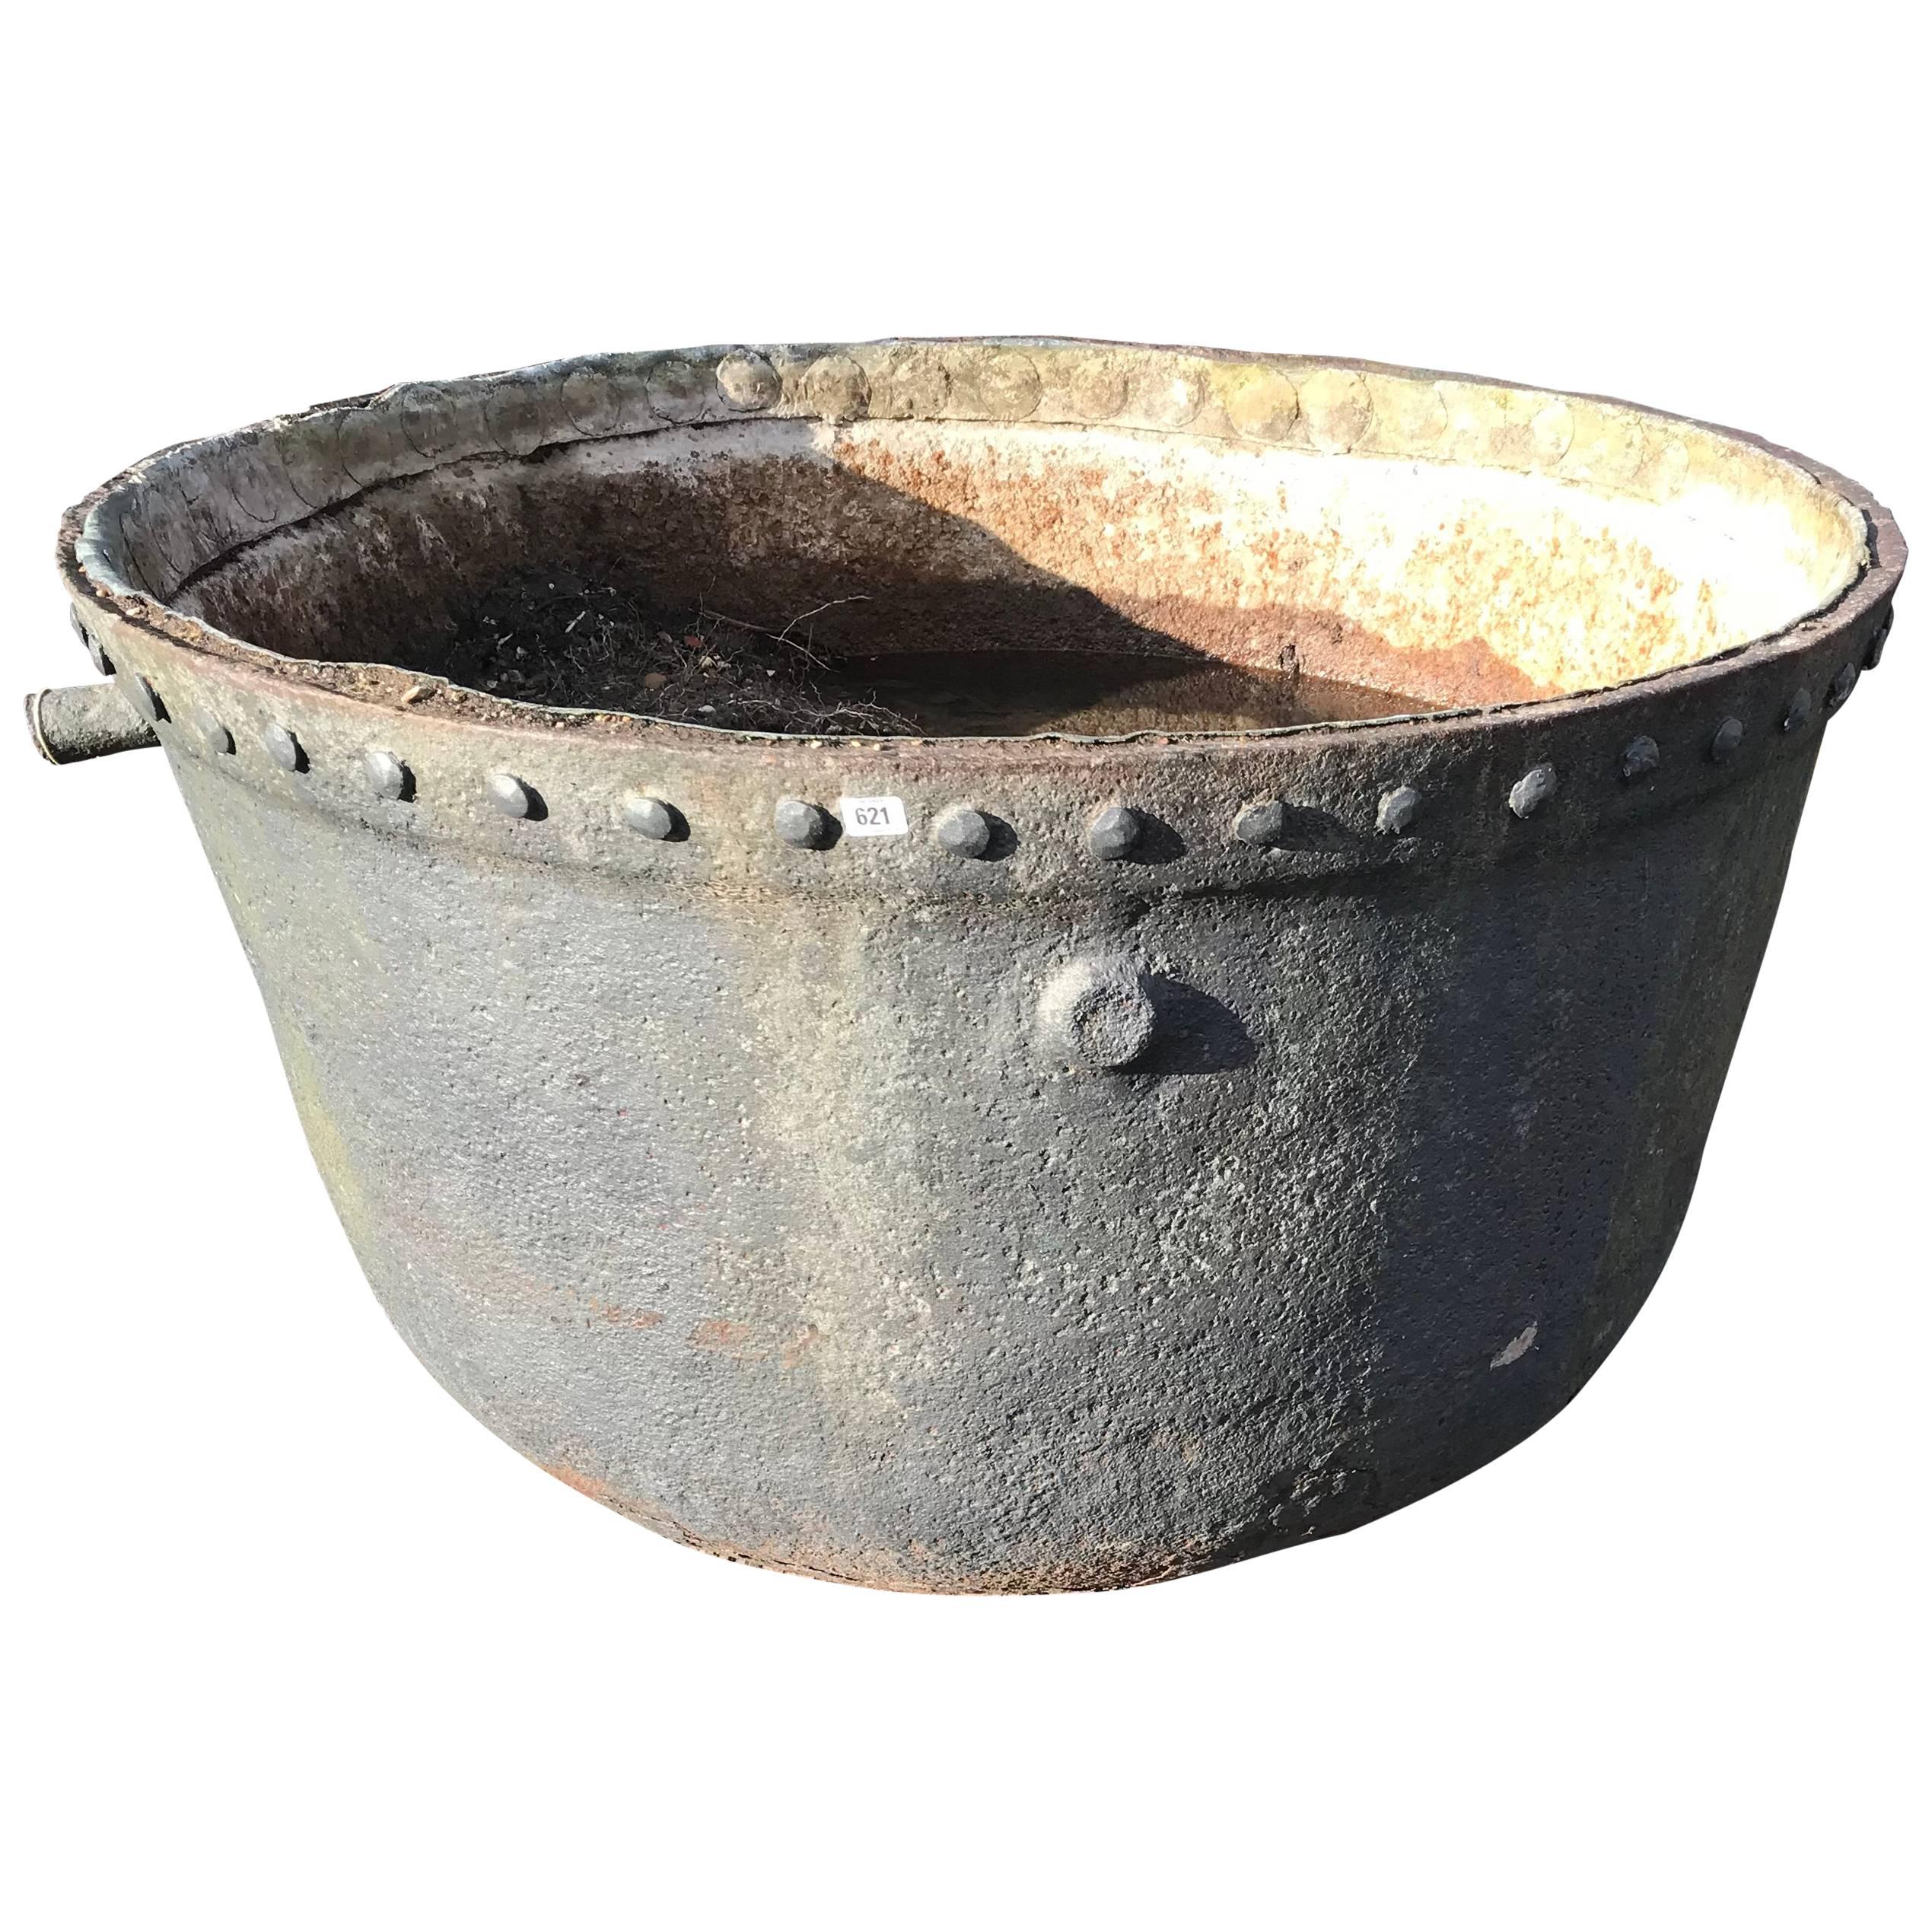 A LARGE LATE 19TH/EARLY 20TH CENTURY CAST IRON STUDDED Cauldron